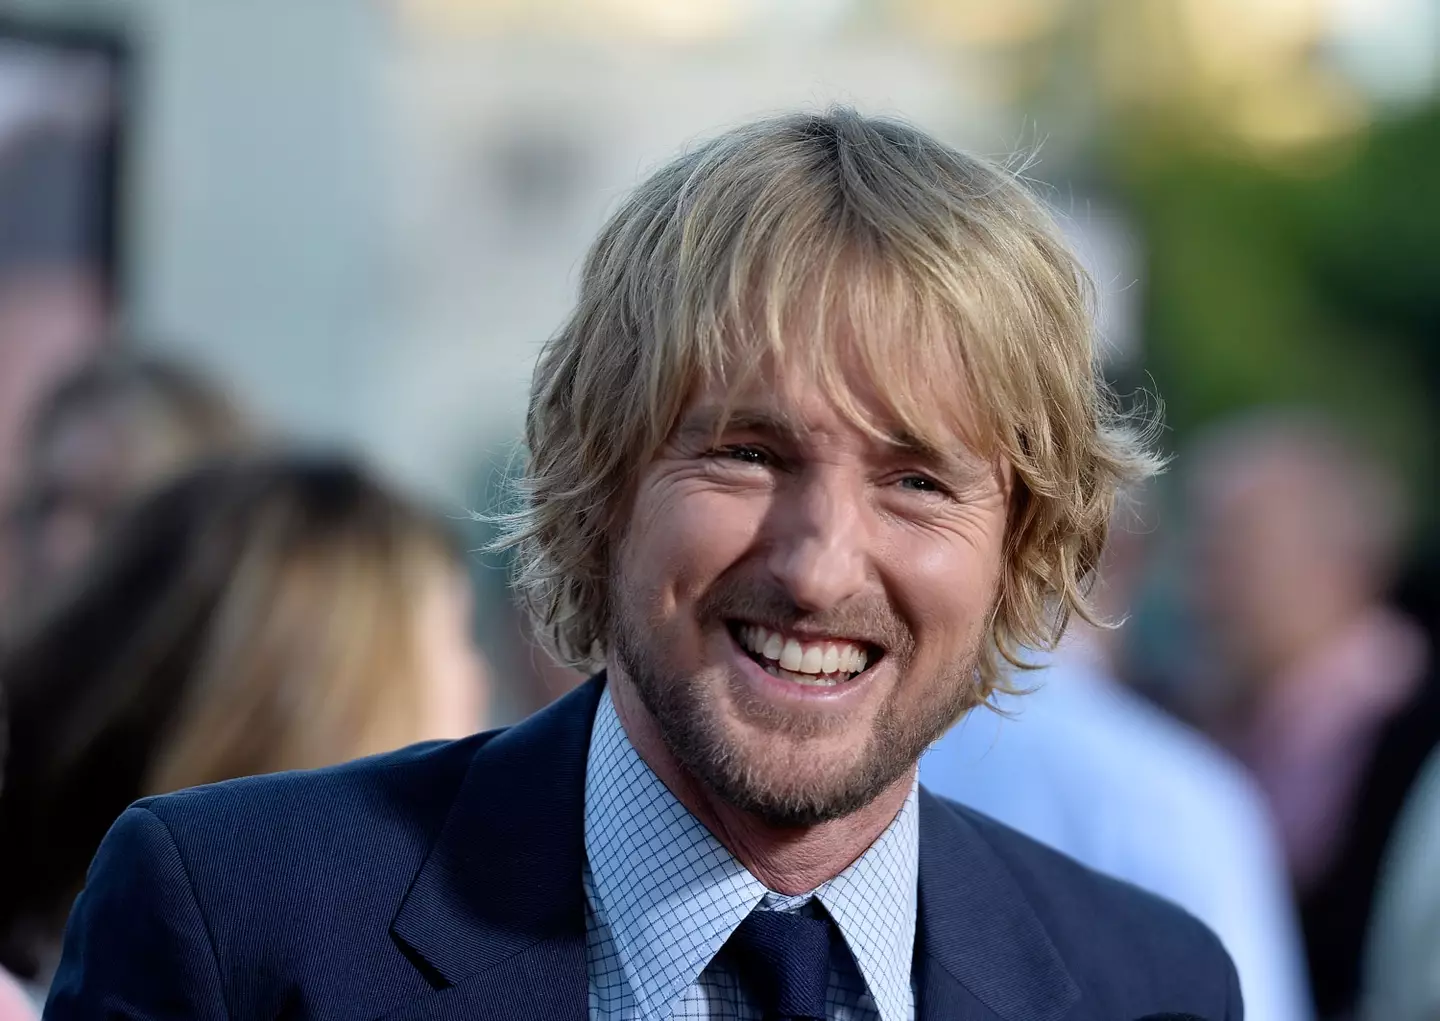 Not only is Owen Wilson's brother famous, he is also an actor.